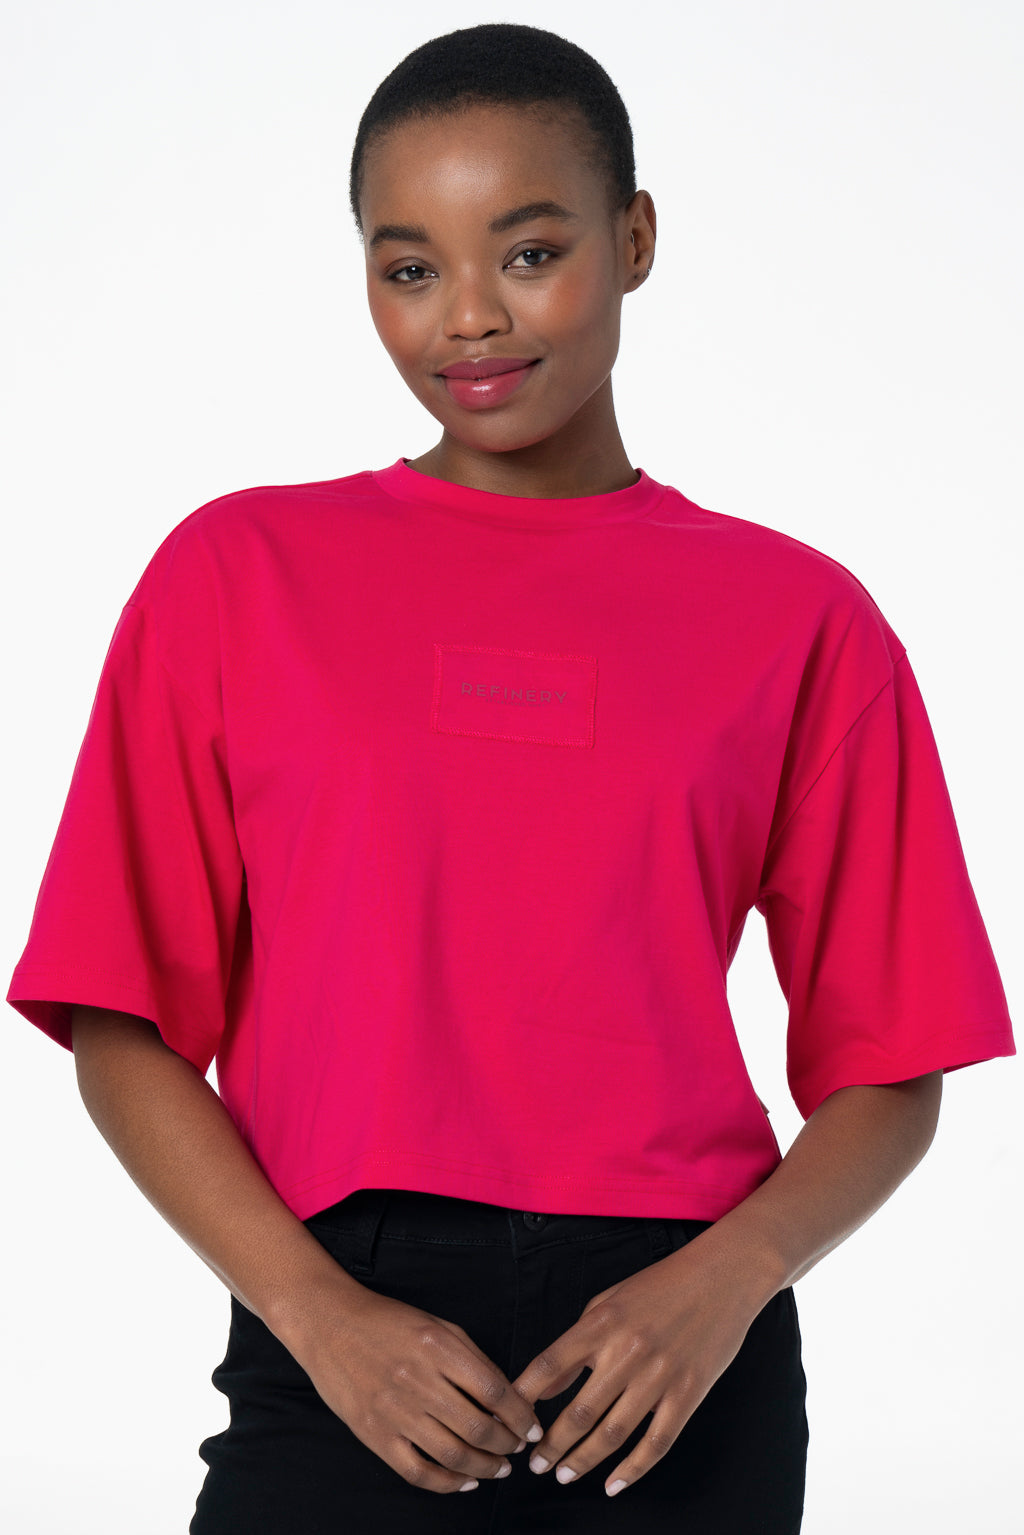 Boxy Branded T-Shirt _ 143192 _ Pink